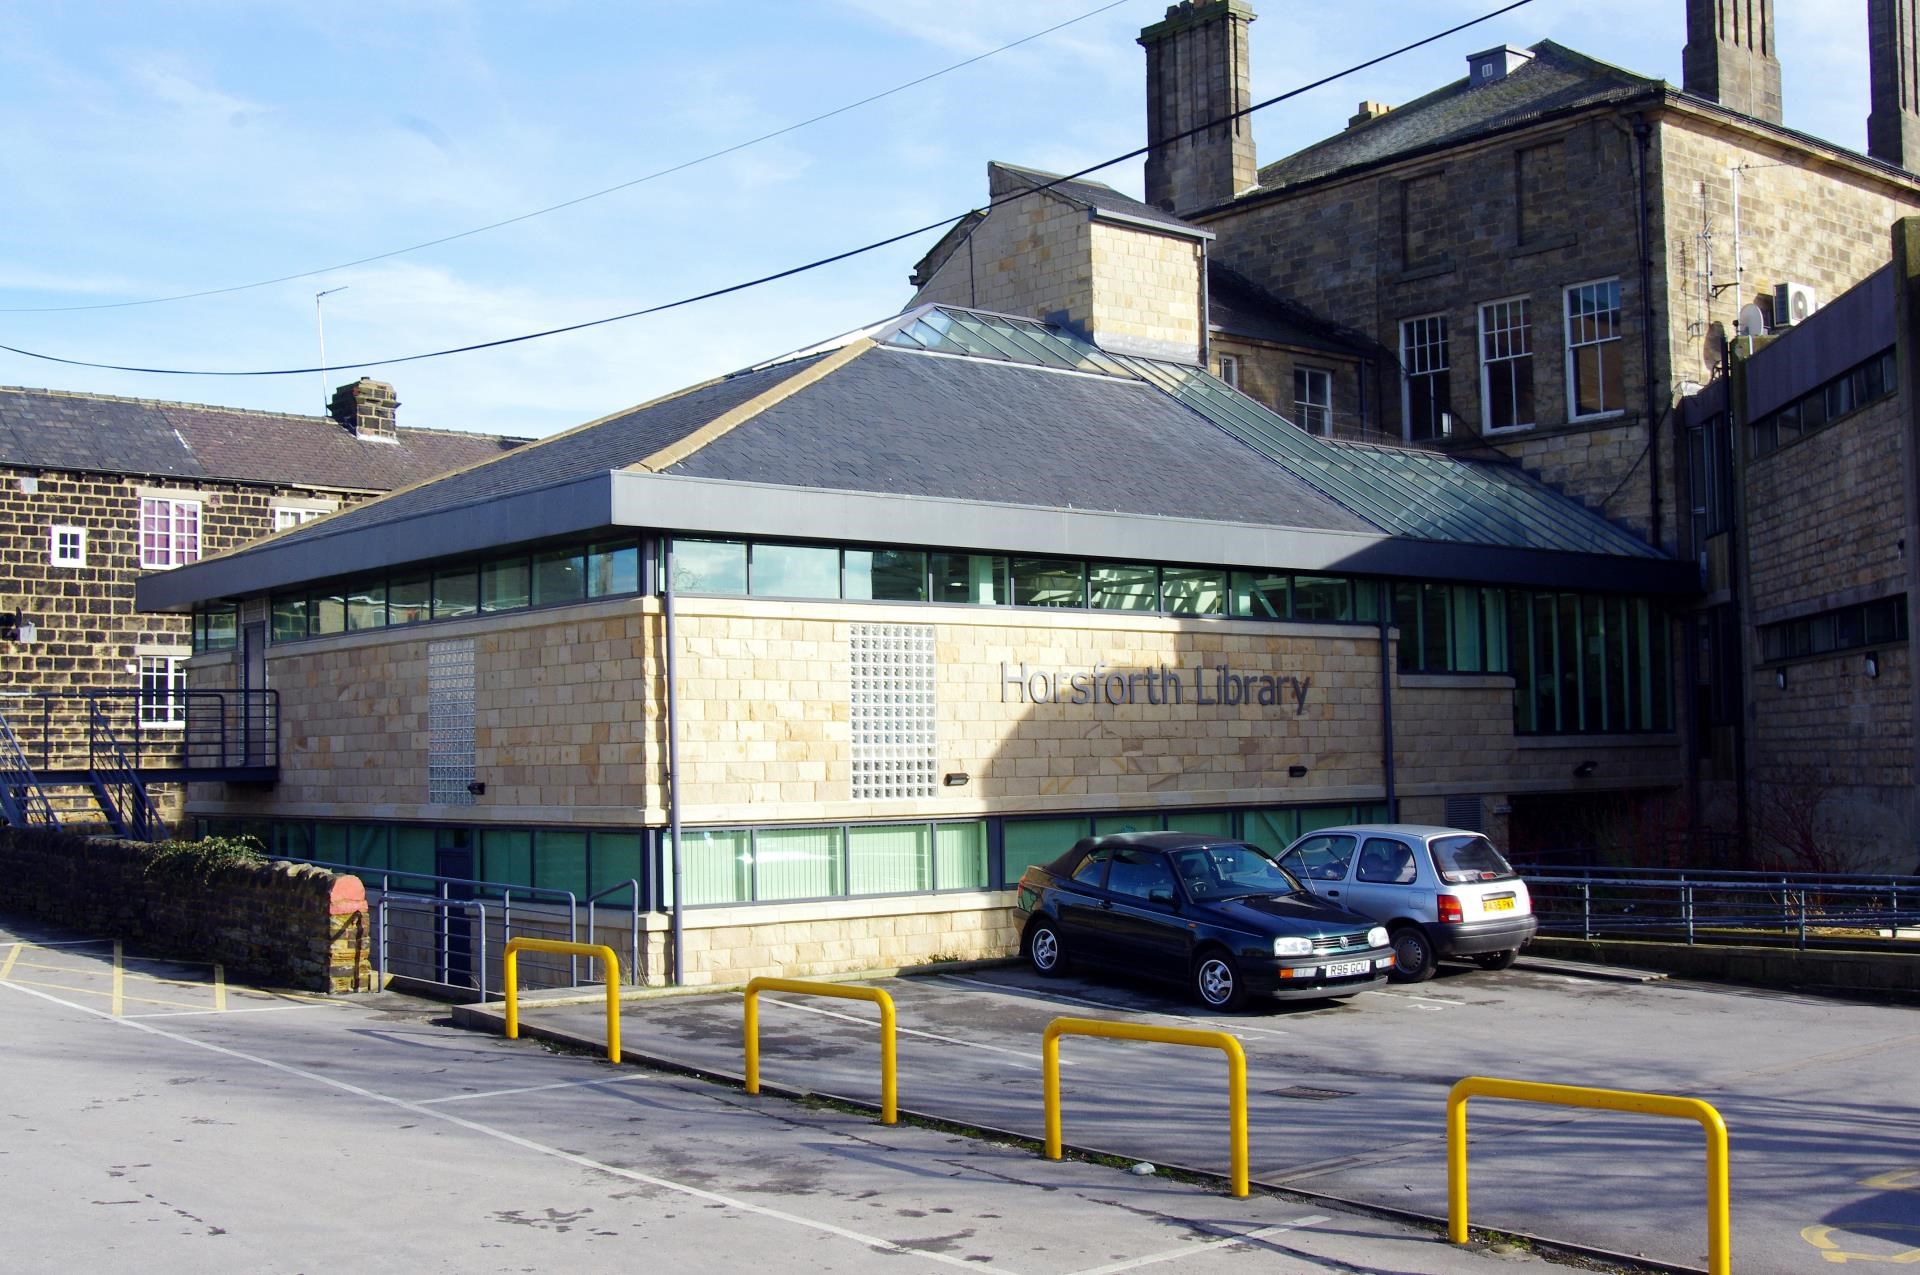 Picture of Horsforth Library